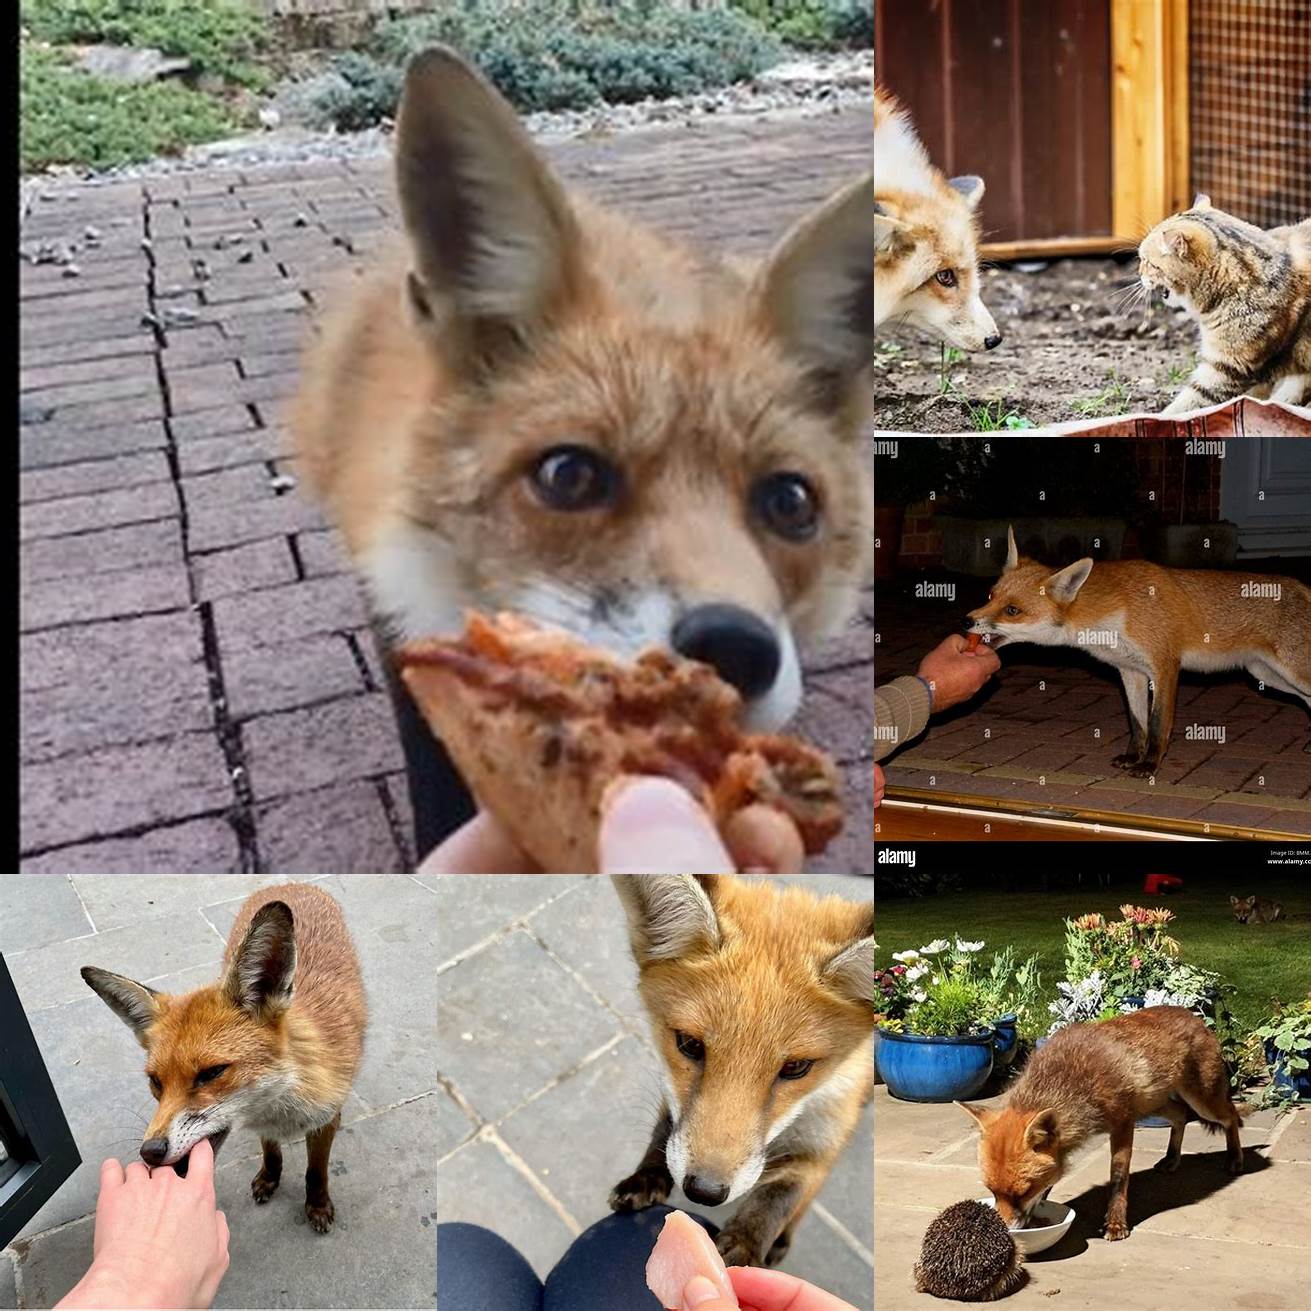 A picture of a person feeding a fox